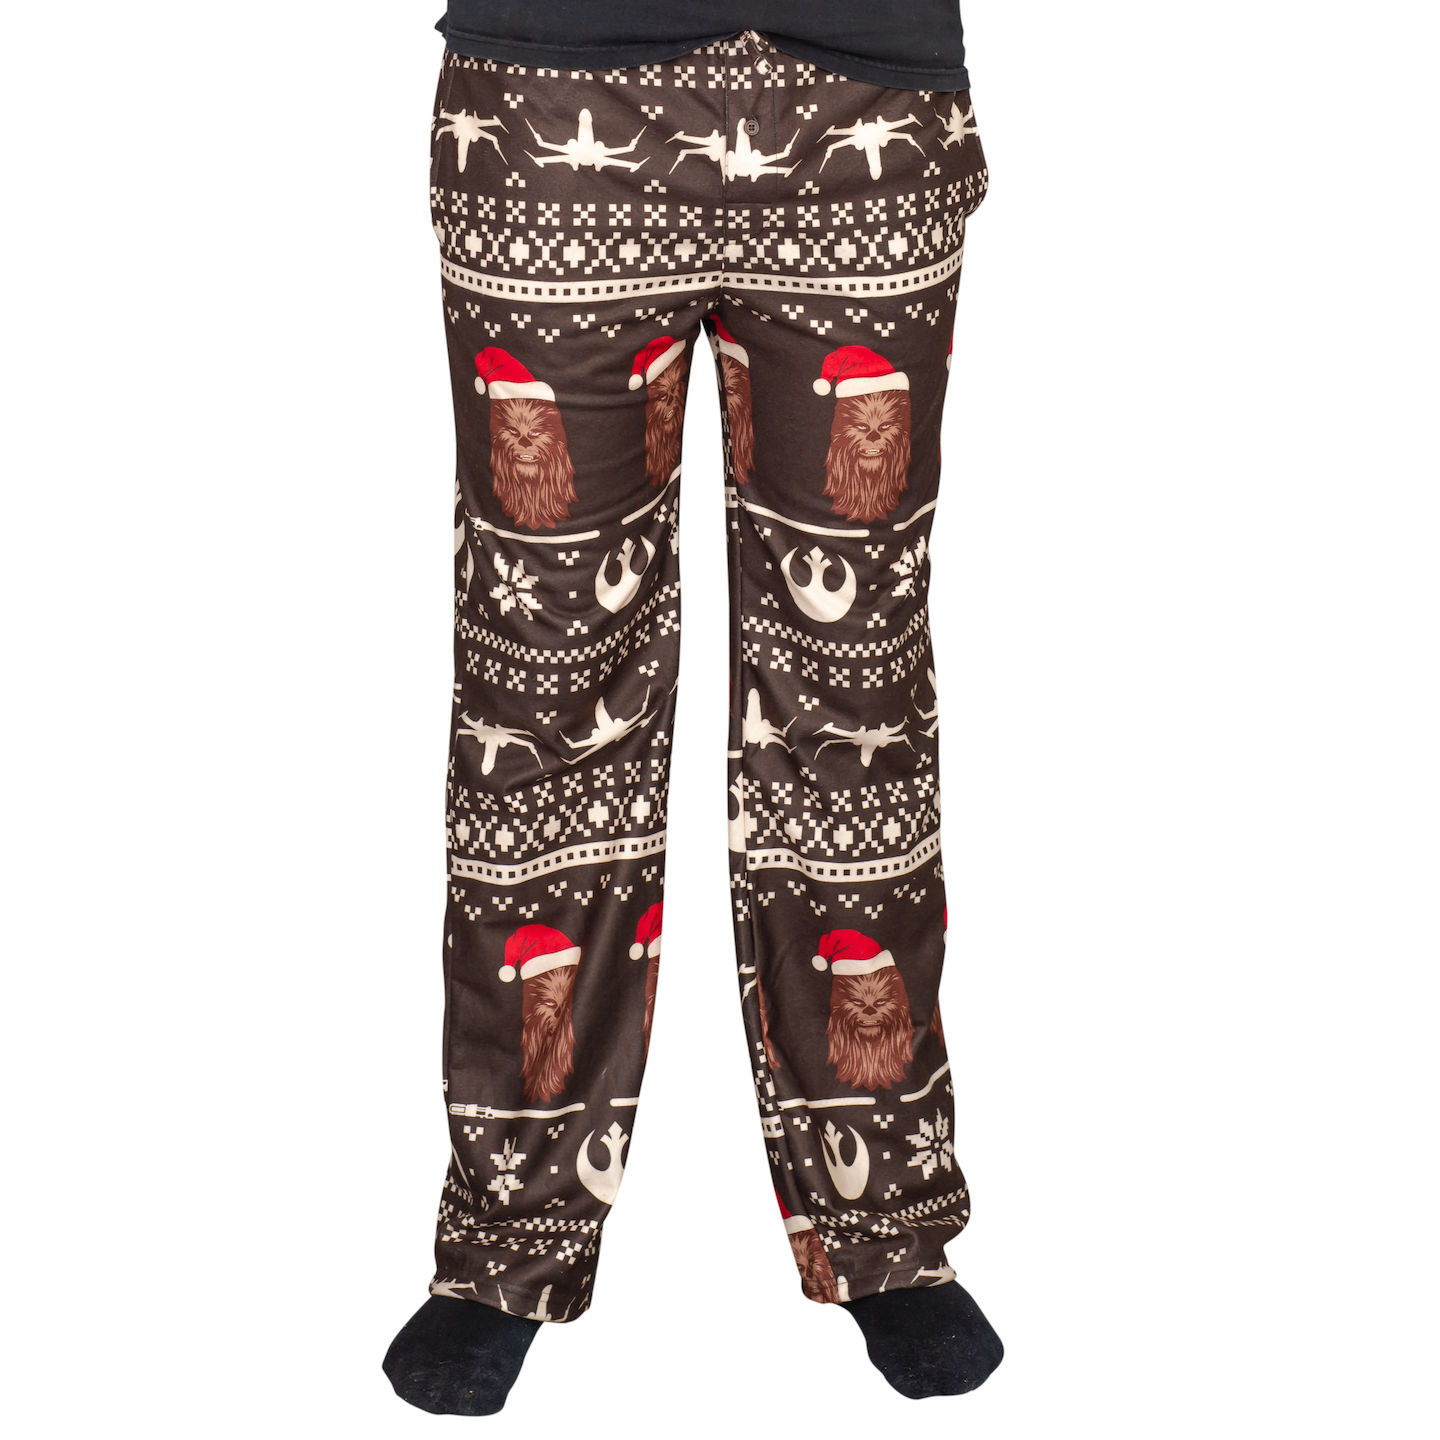 Star Wars Chewbacca Ships Christmas Lounge Pants,Specials : uglyschristmassweater.com